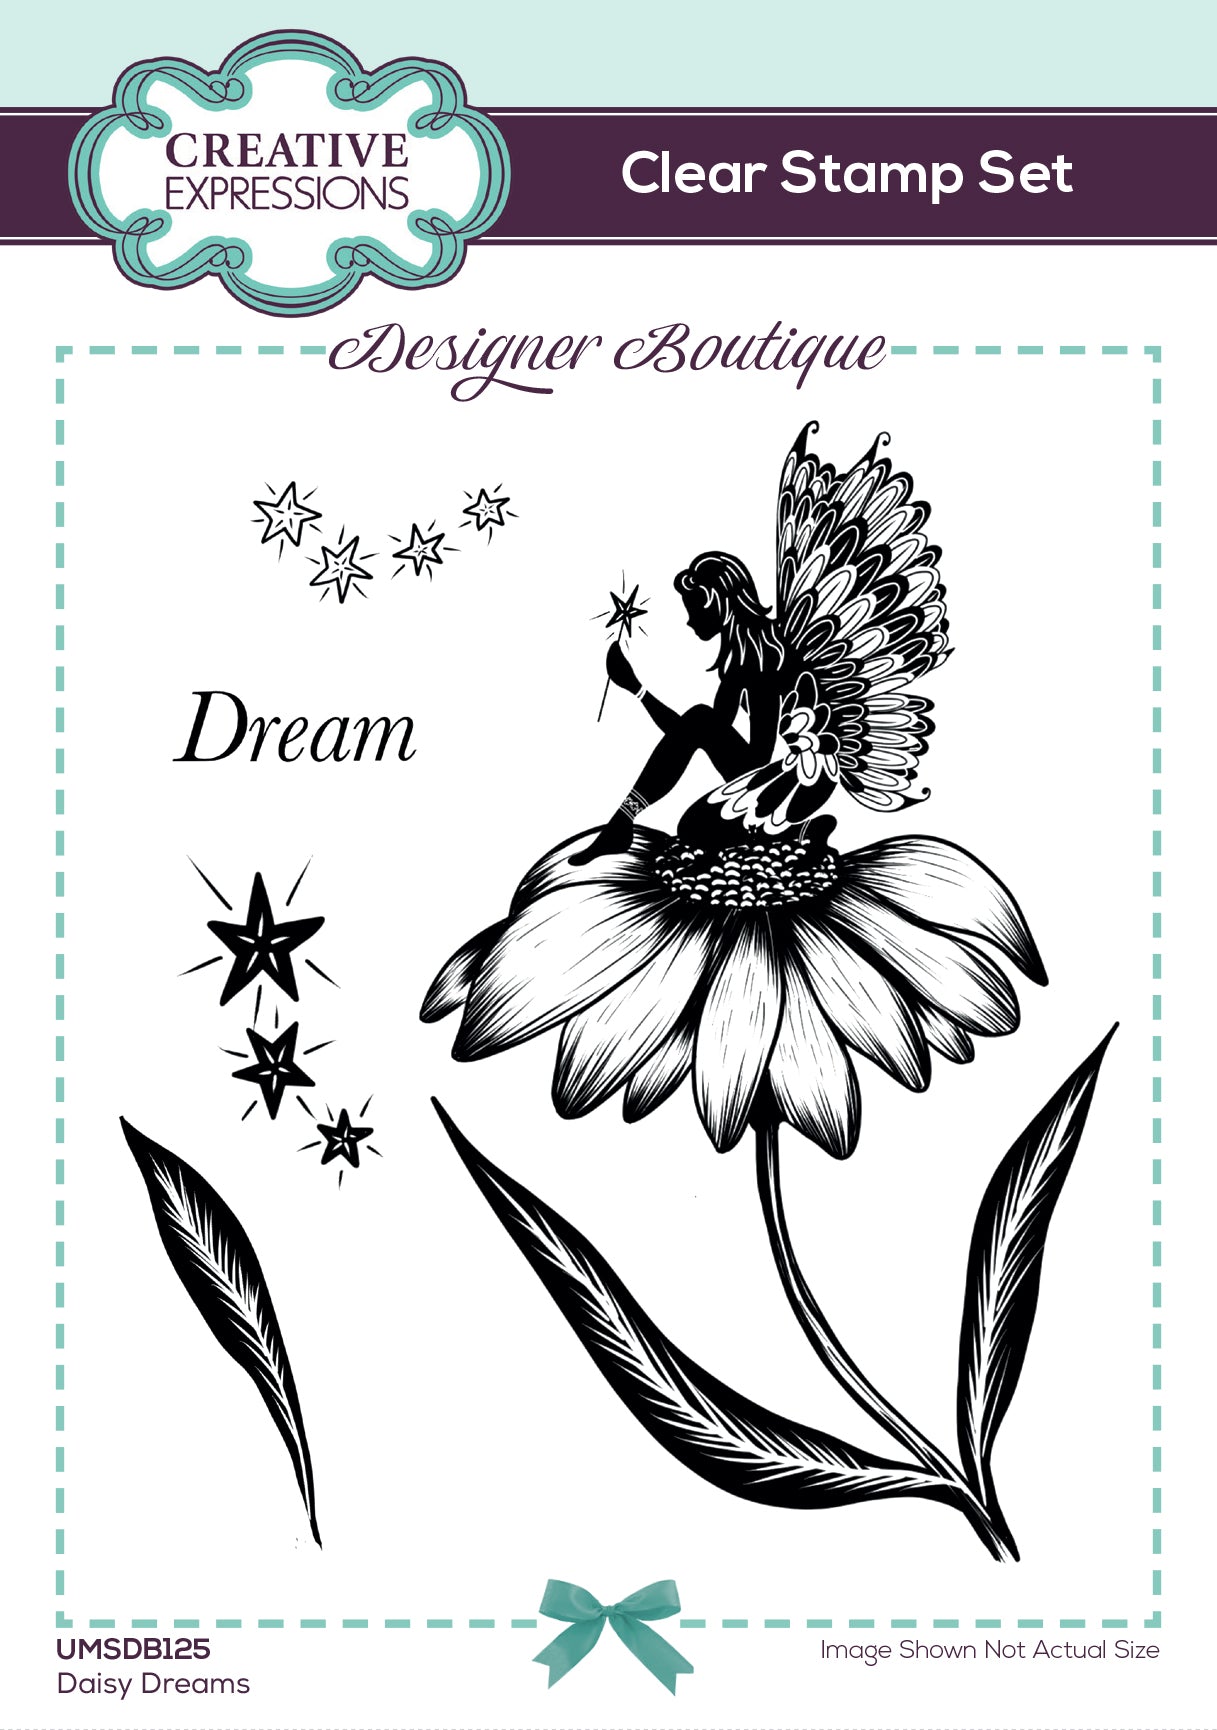 Creative Expressions Designer Boutique Daisy Dreams 6 in x 4 in Clear Stamp Set